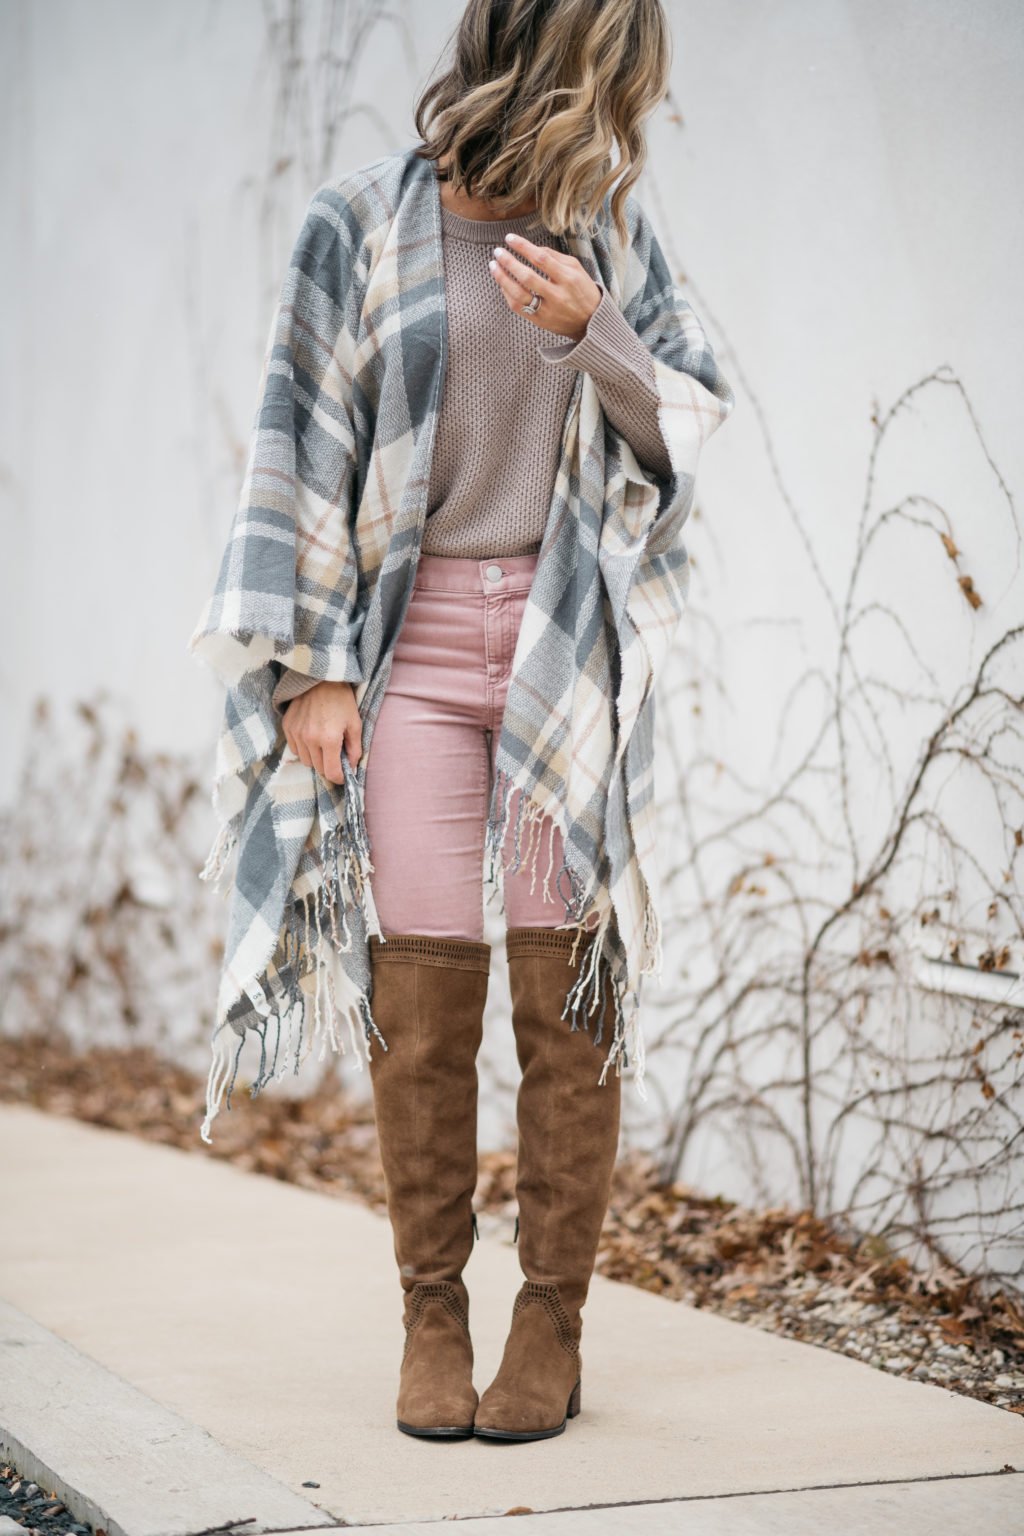 Winter style: pink corduroys, sweater, blanket scarf, over the knee boots